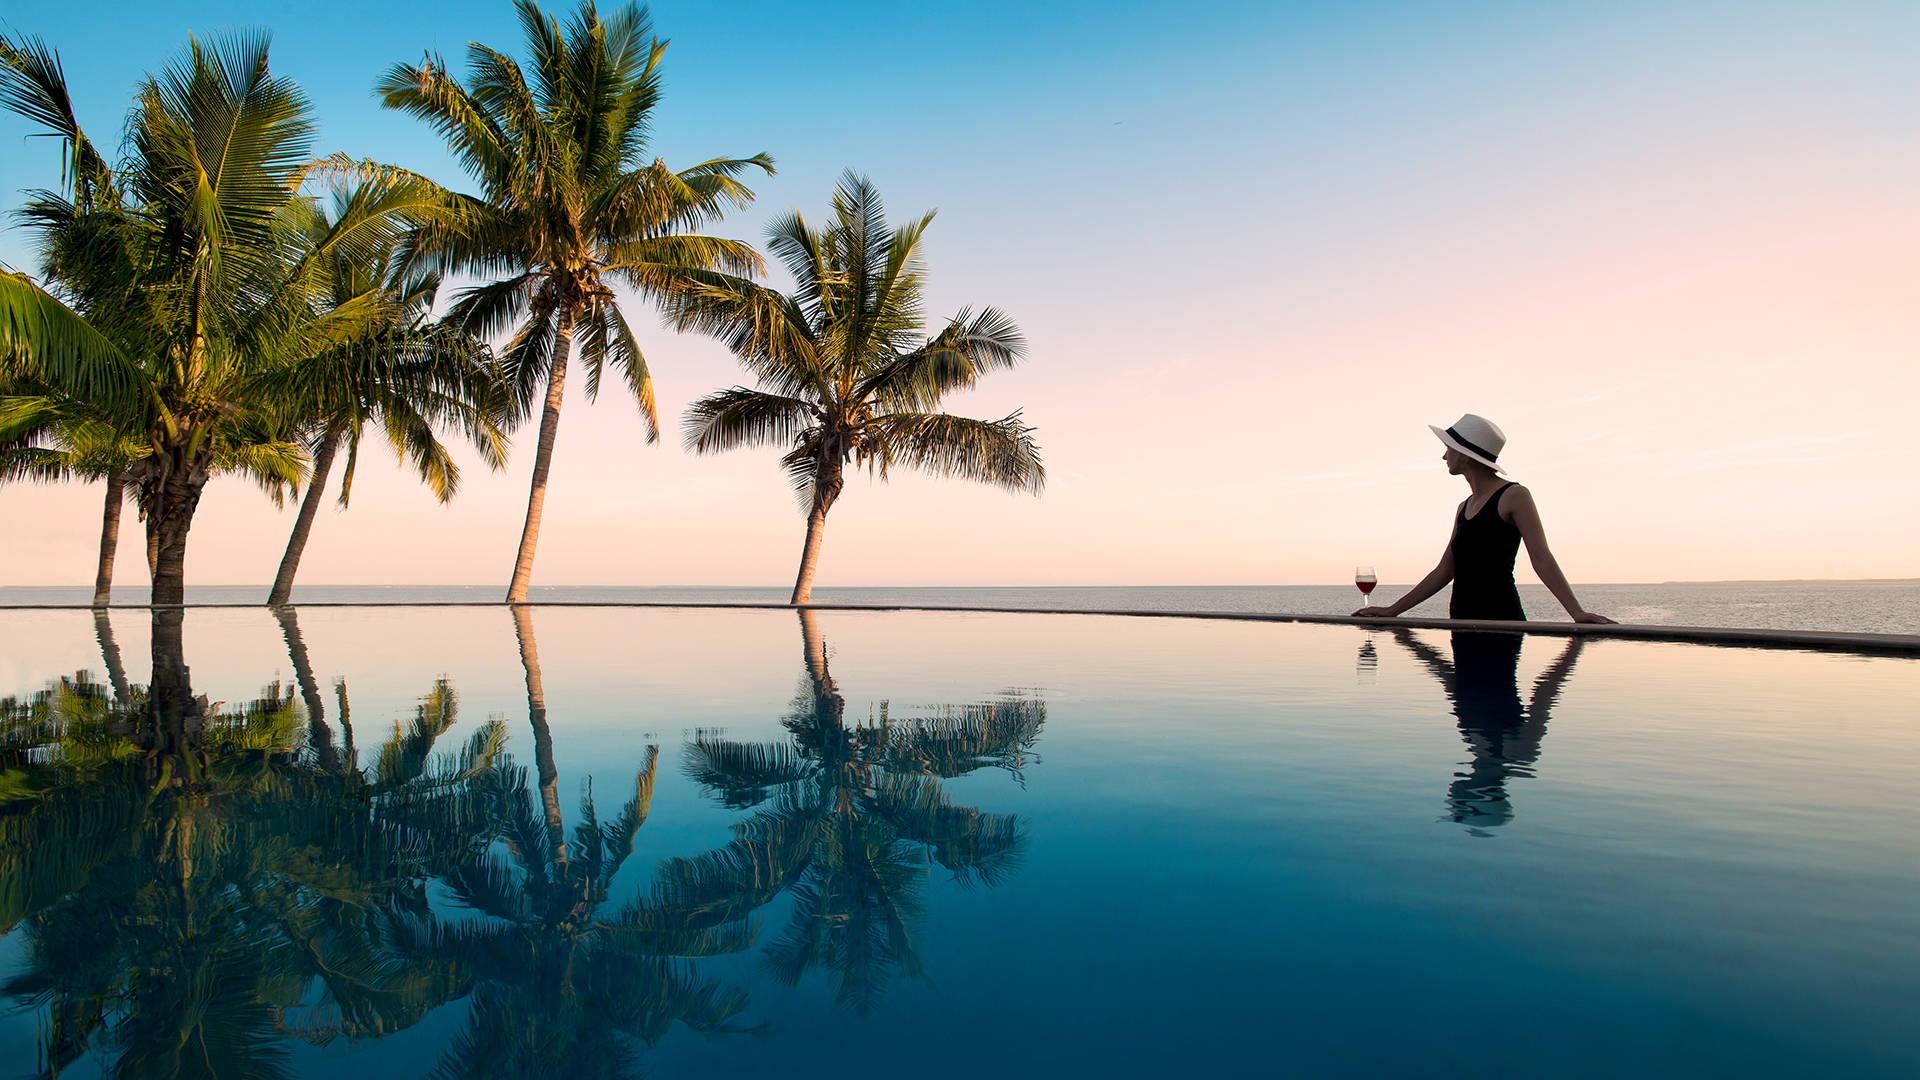 Infinity Pool At Mozambique Hotel Background